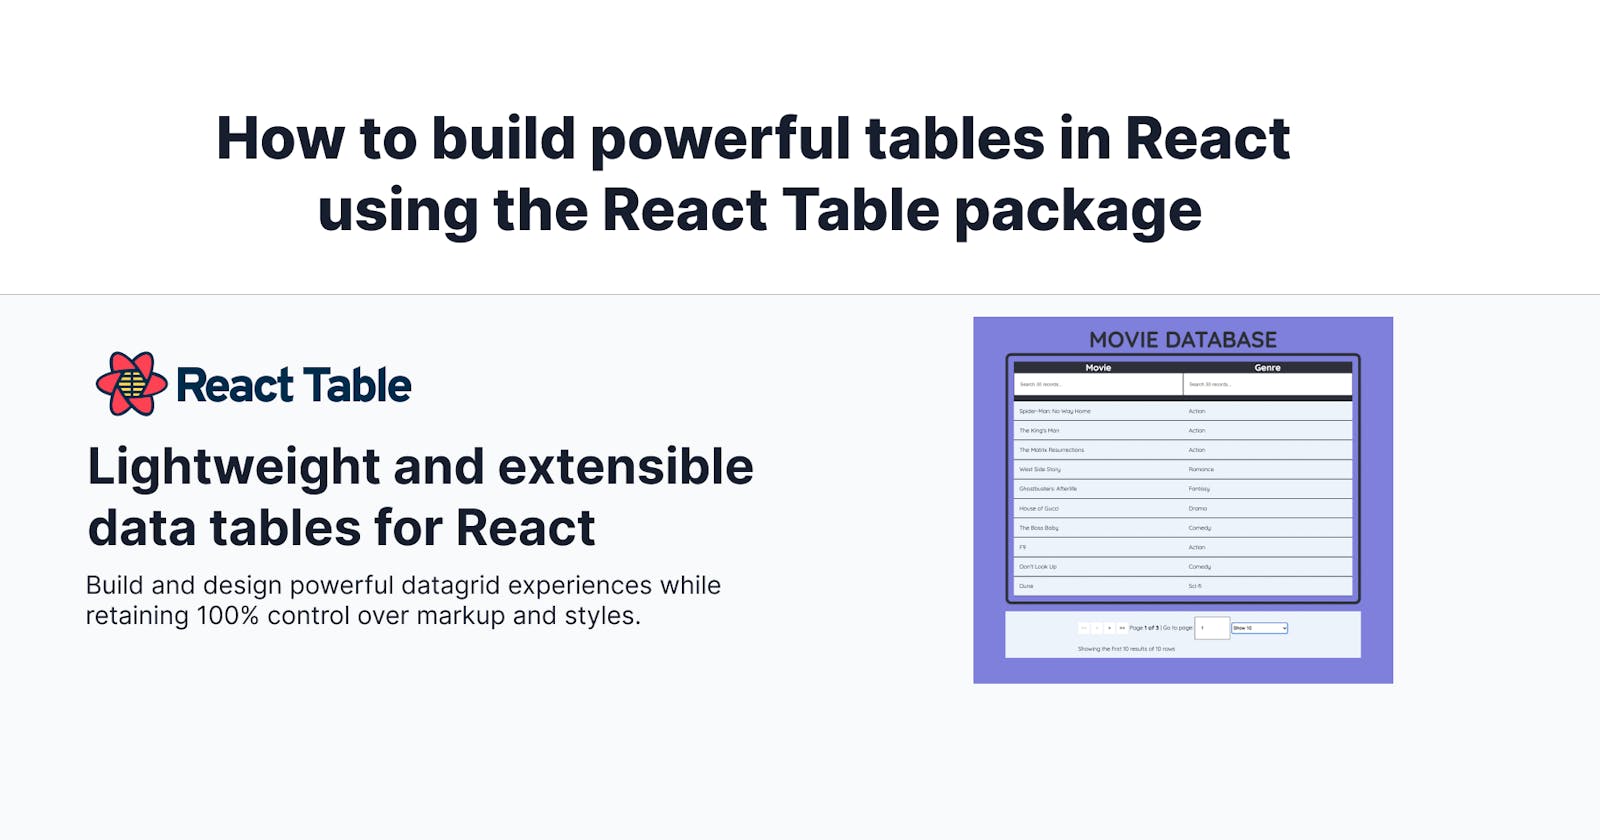 How to build powerful tables in React using the React Table package